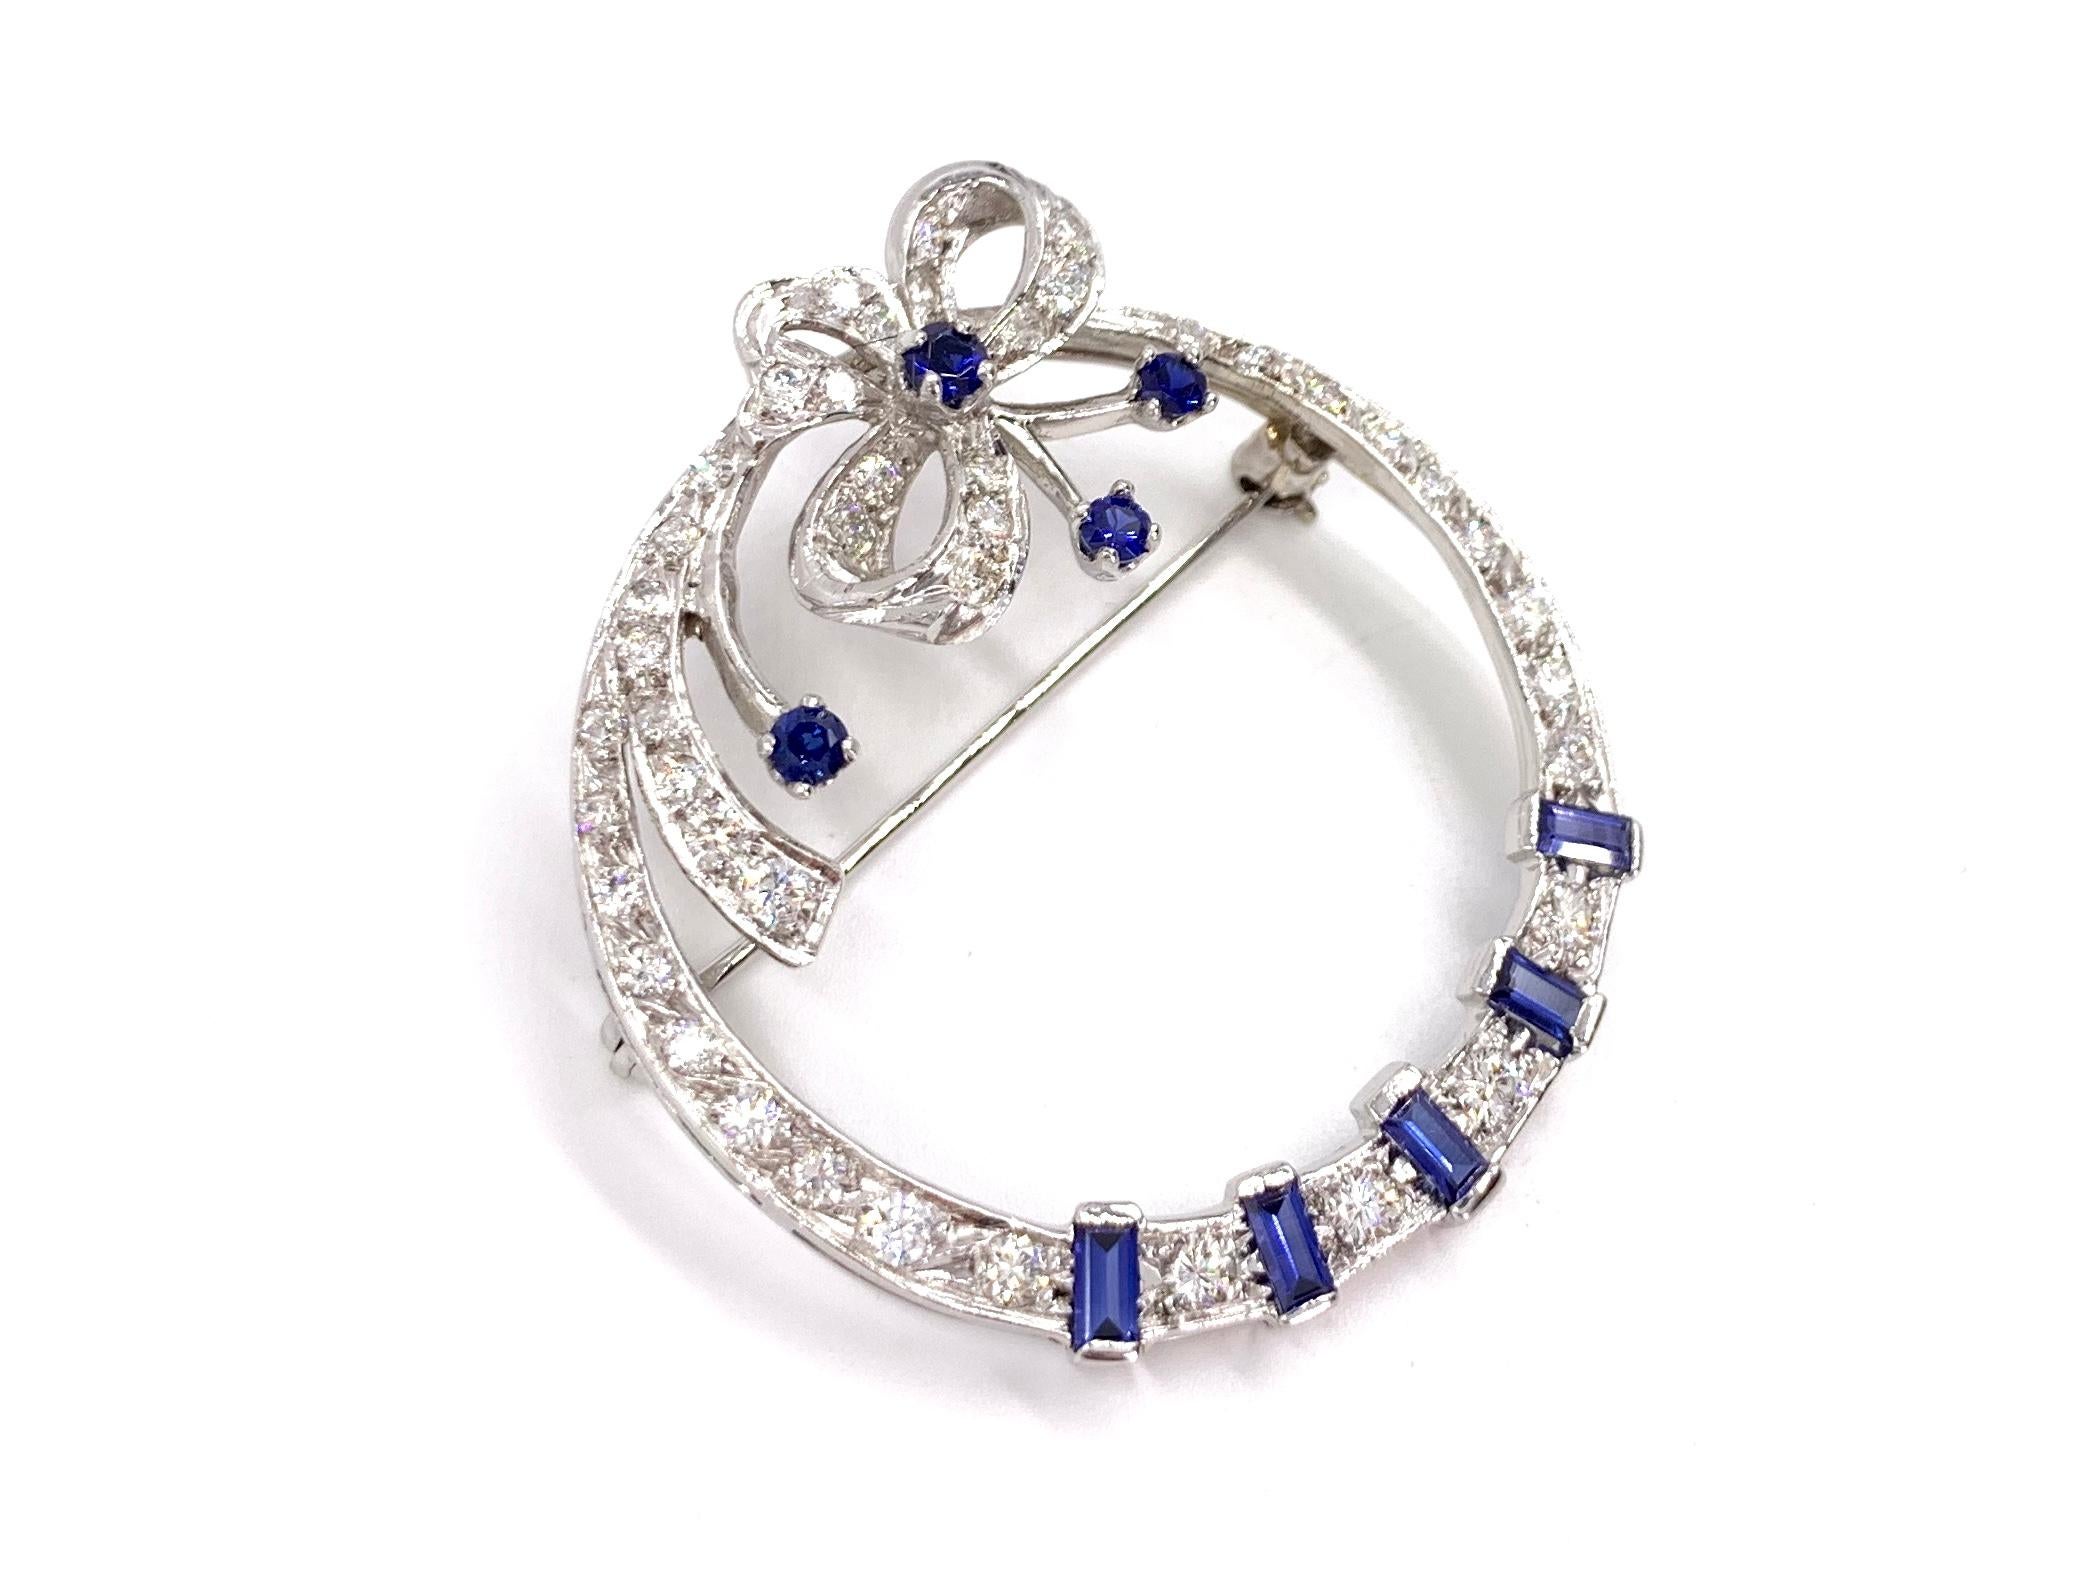 An exquisite 14 karat white gold bow garland style circle brooch featuring high quality blue sapphires and diamonds. Brooch has an approximate diamond total weight of 2 carats at approximately G color, SI1 clarity. Nine vivid, very well saturated